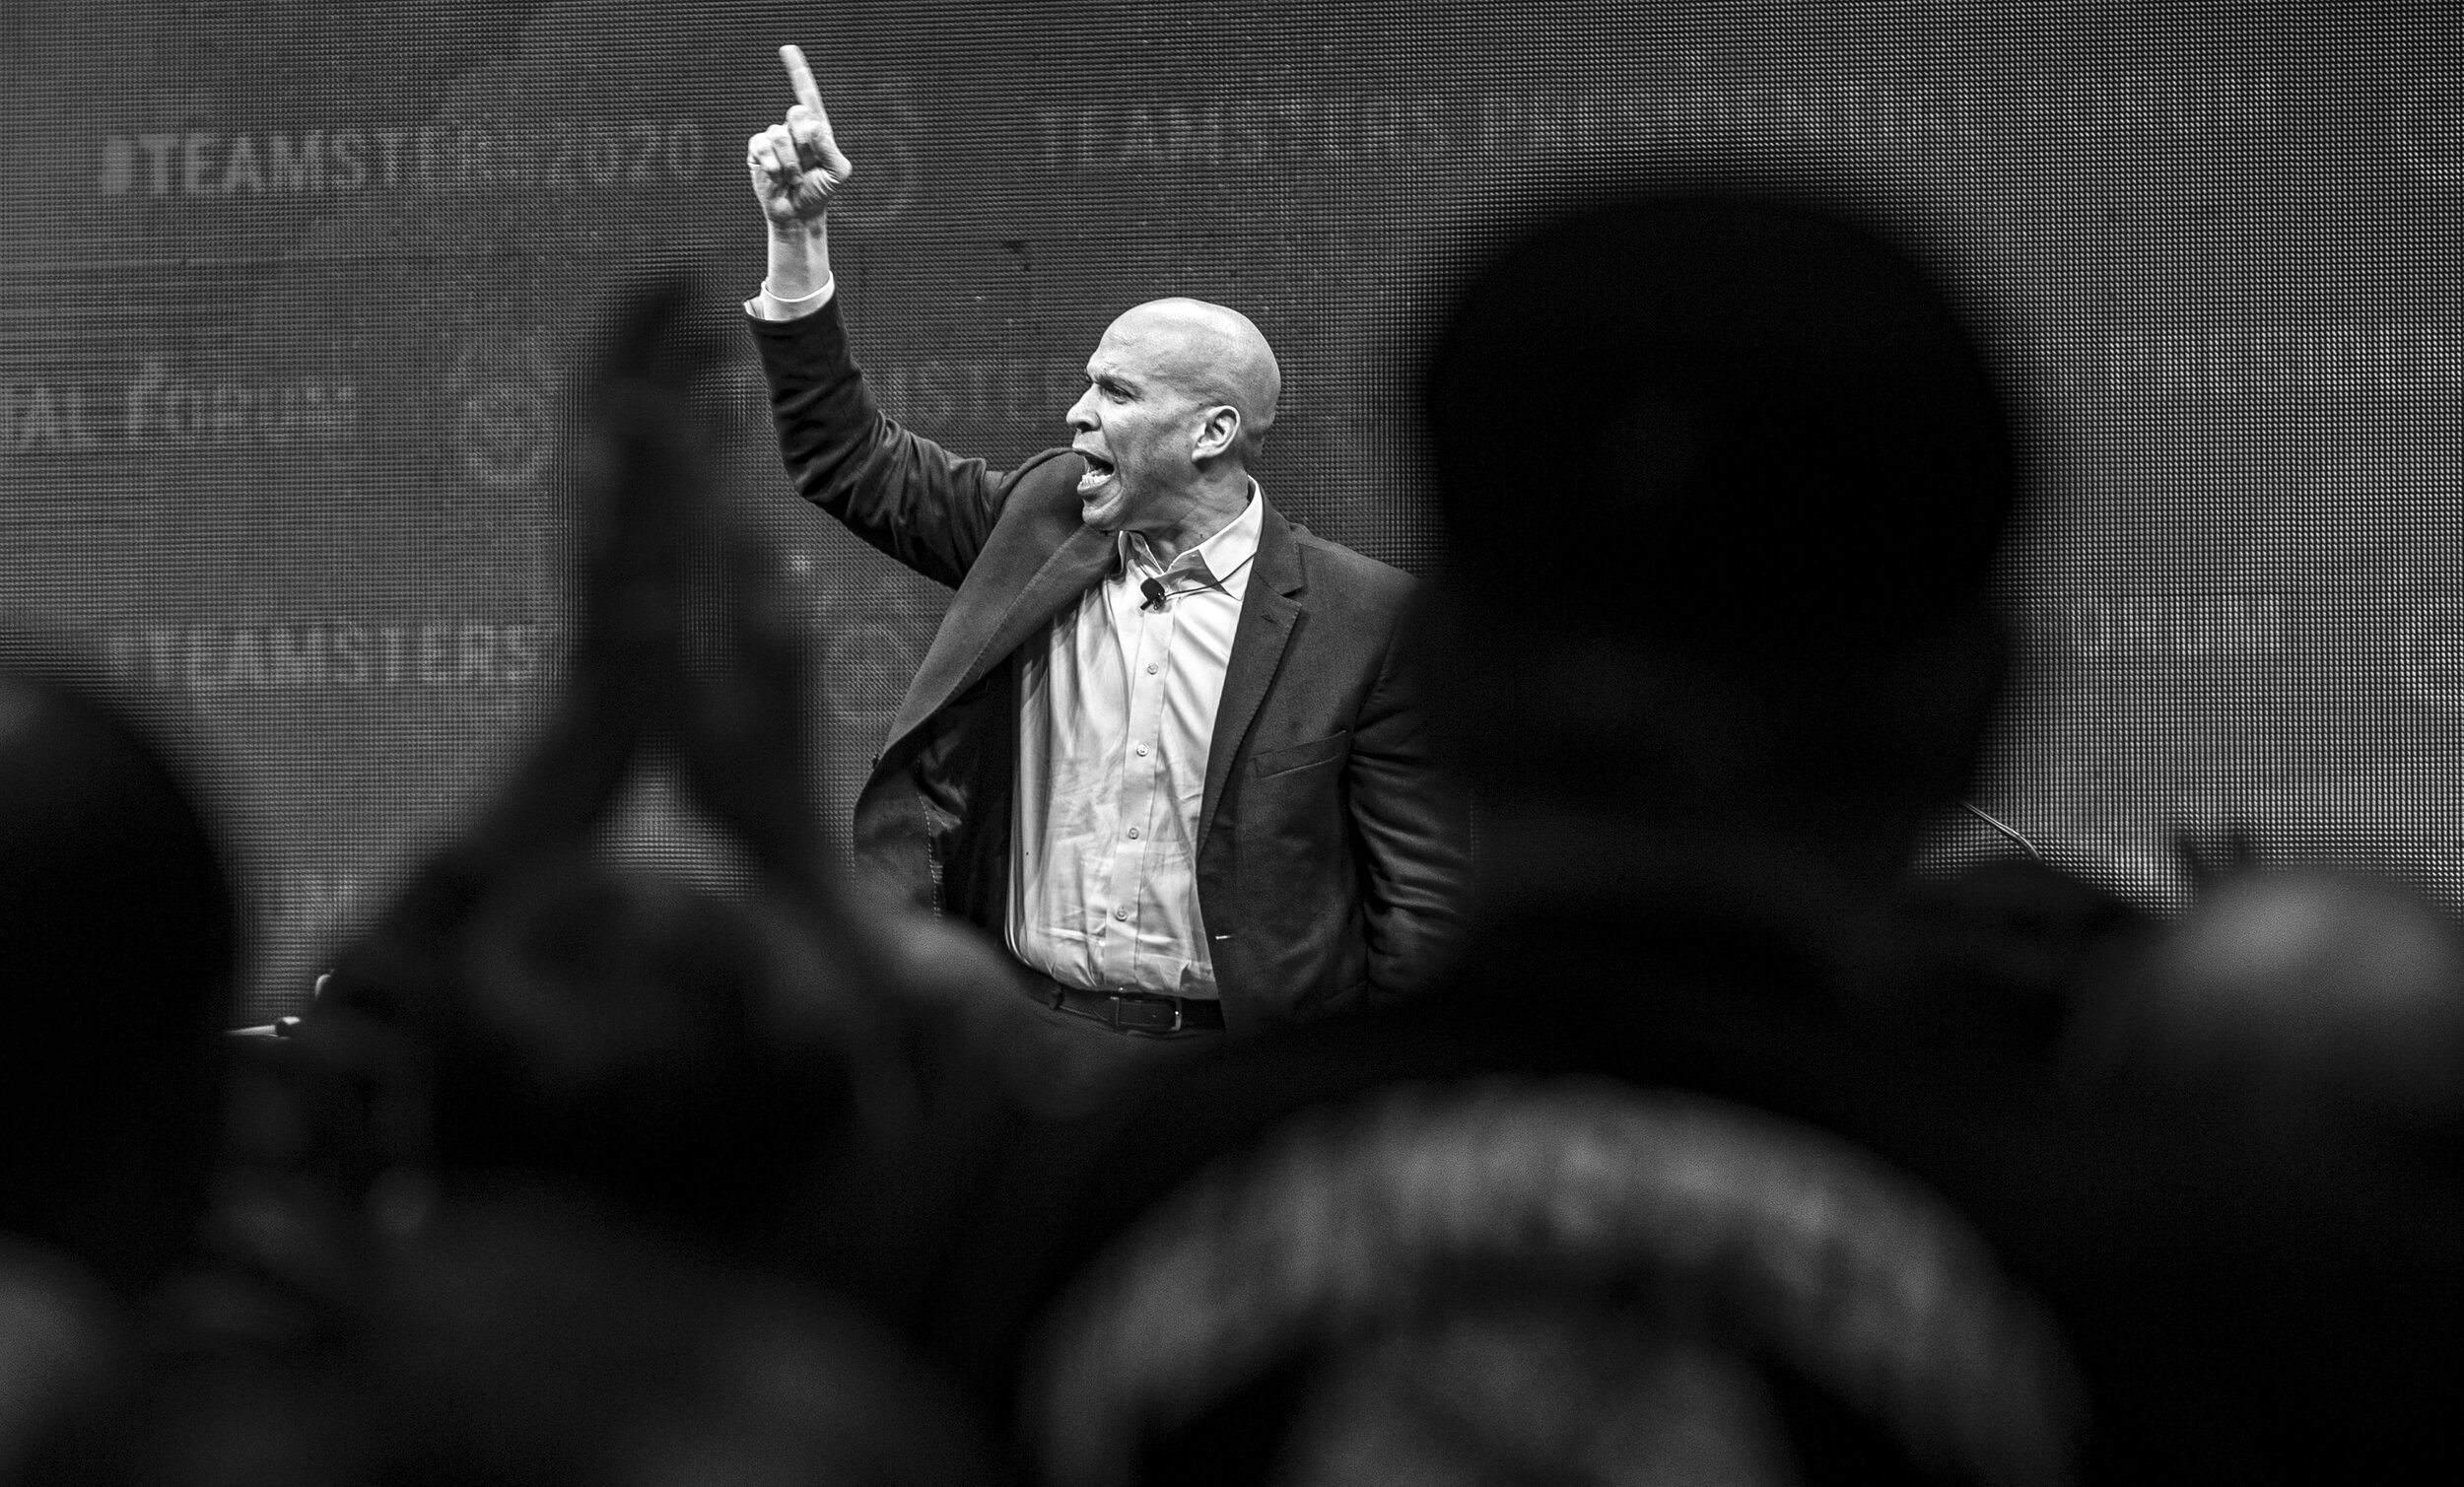  Democratic presidential candidate Sen. Cory Booker (D-N.J.) cheers to the crowd as he exits the stage after speaking during the Teamsters Presidential Candidate Forum at the Veterans Memorial Coliseum in Cedar Rapids, Iowa, Saturday. 